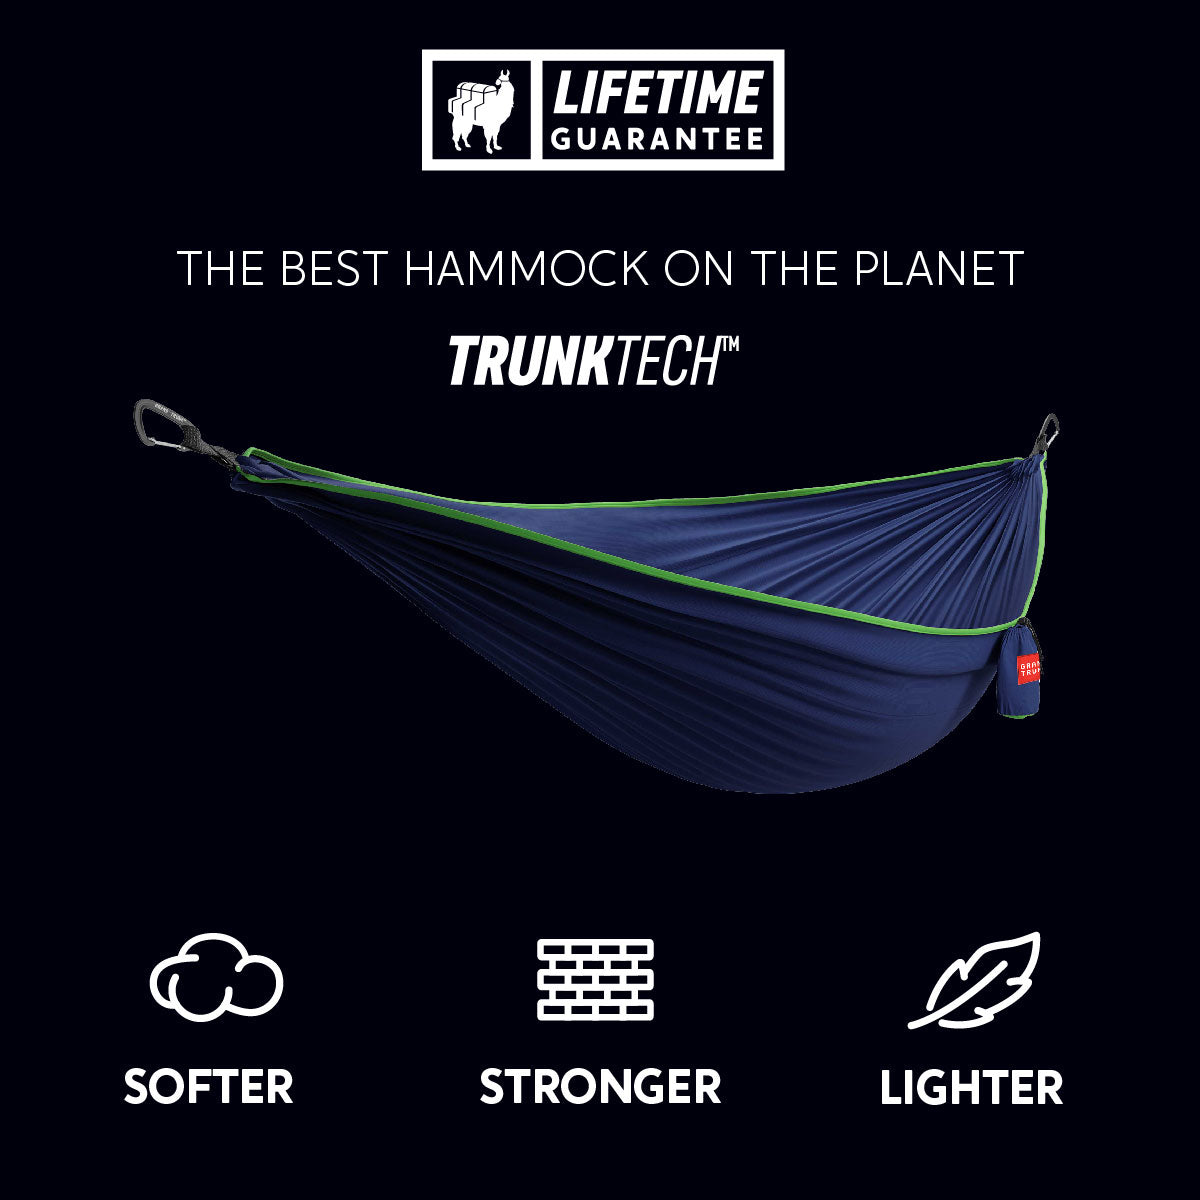 TrunkTech™ Hammock—Lighter, Softer, Stronger. The Best Hammock on the Planet. Blue and green